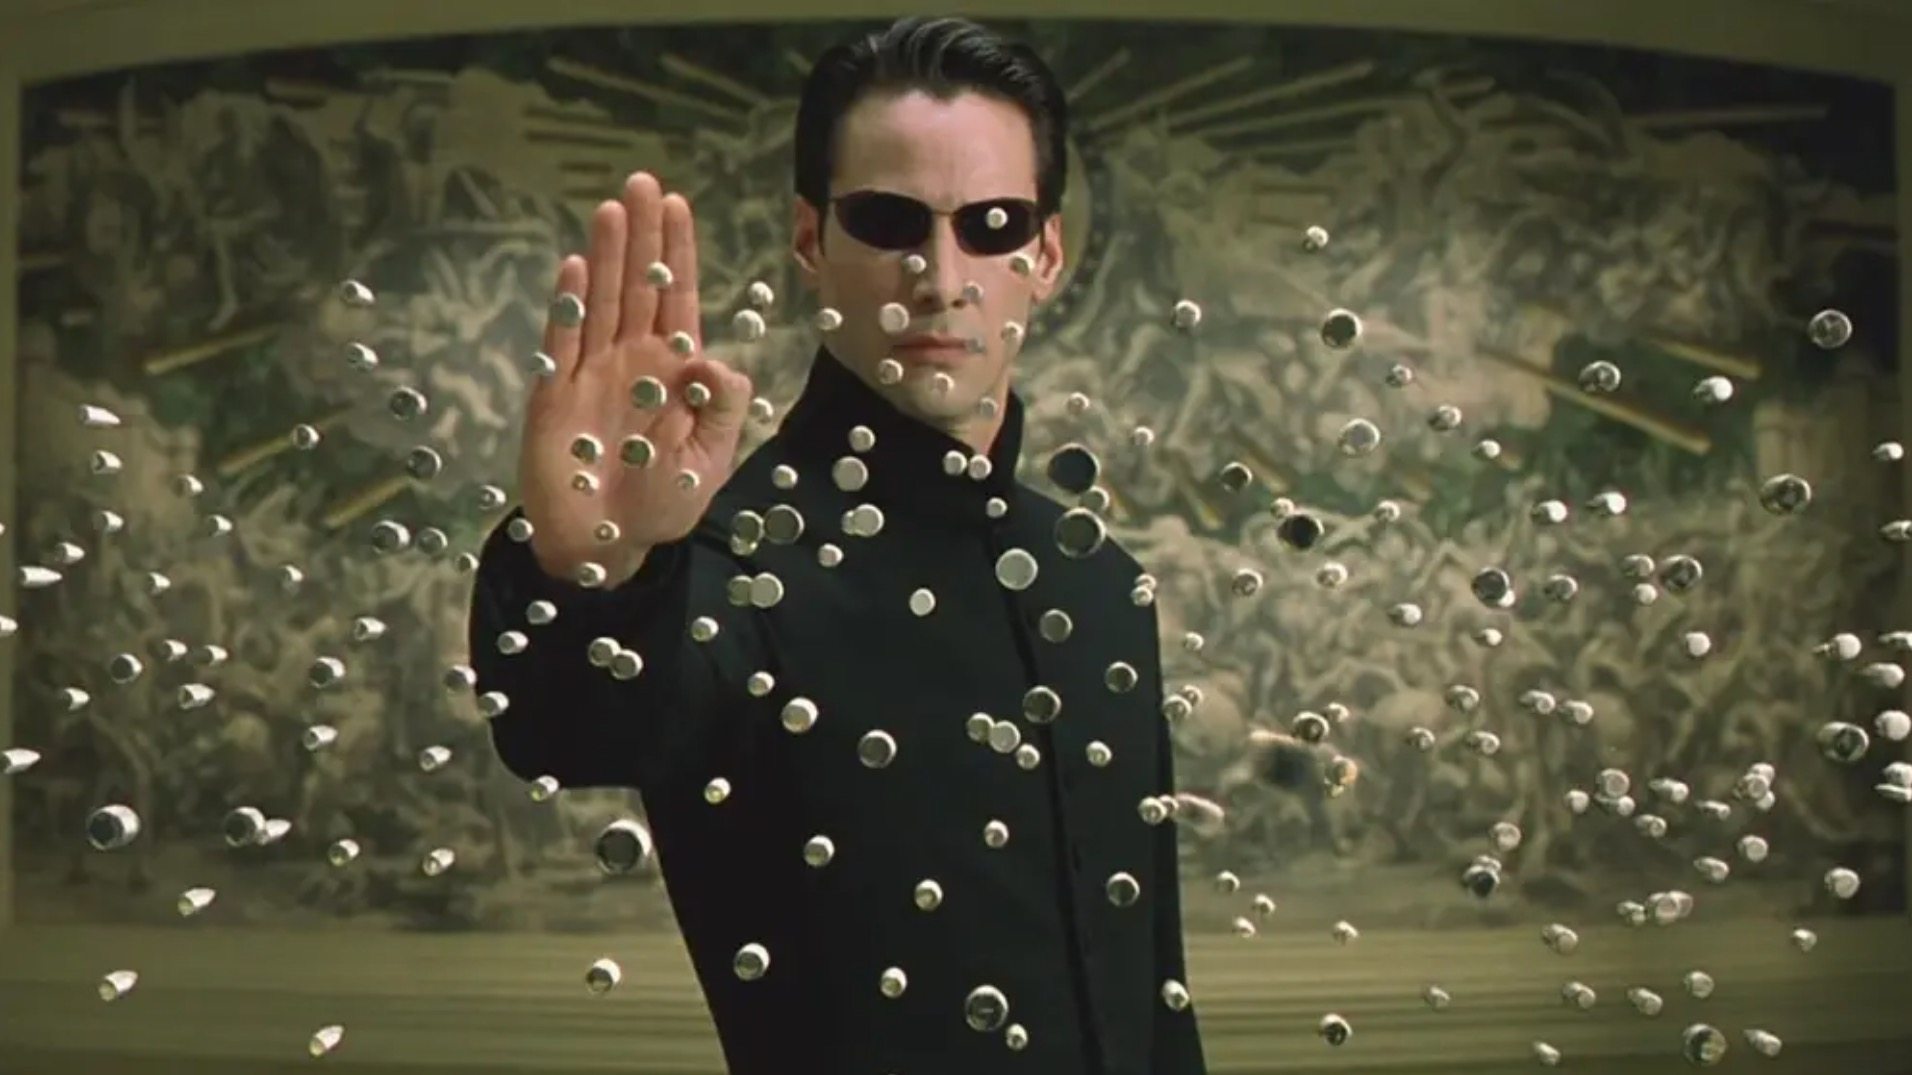 Keanu Reeves as Neo, in a still from The Matrix. The hit sci-fi movie inspired Ricky Chiu, a Hong Kong biotech company CEO, to carve his own path. Photo: Warner Bros.